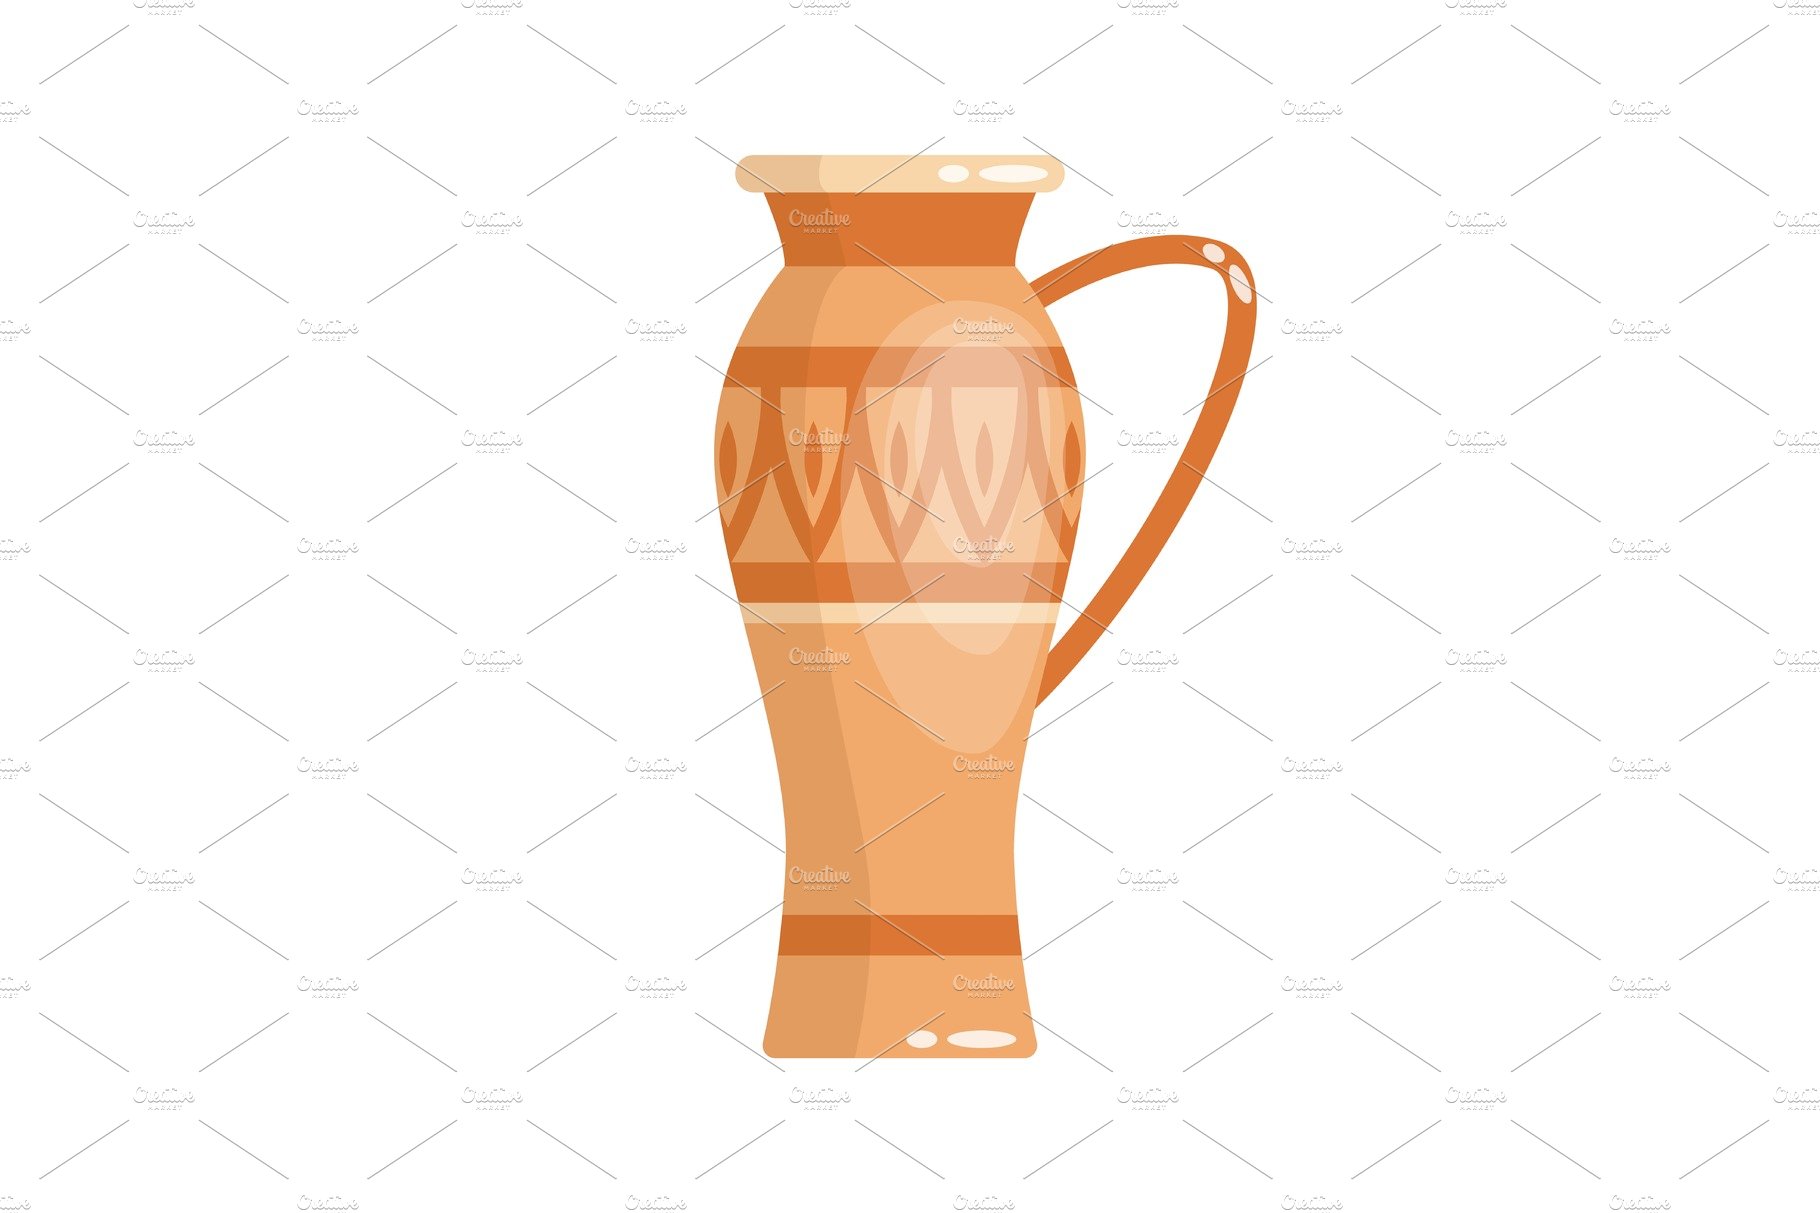 Greek vase in ancient style as cover image.